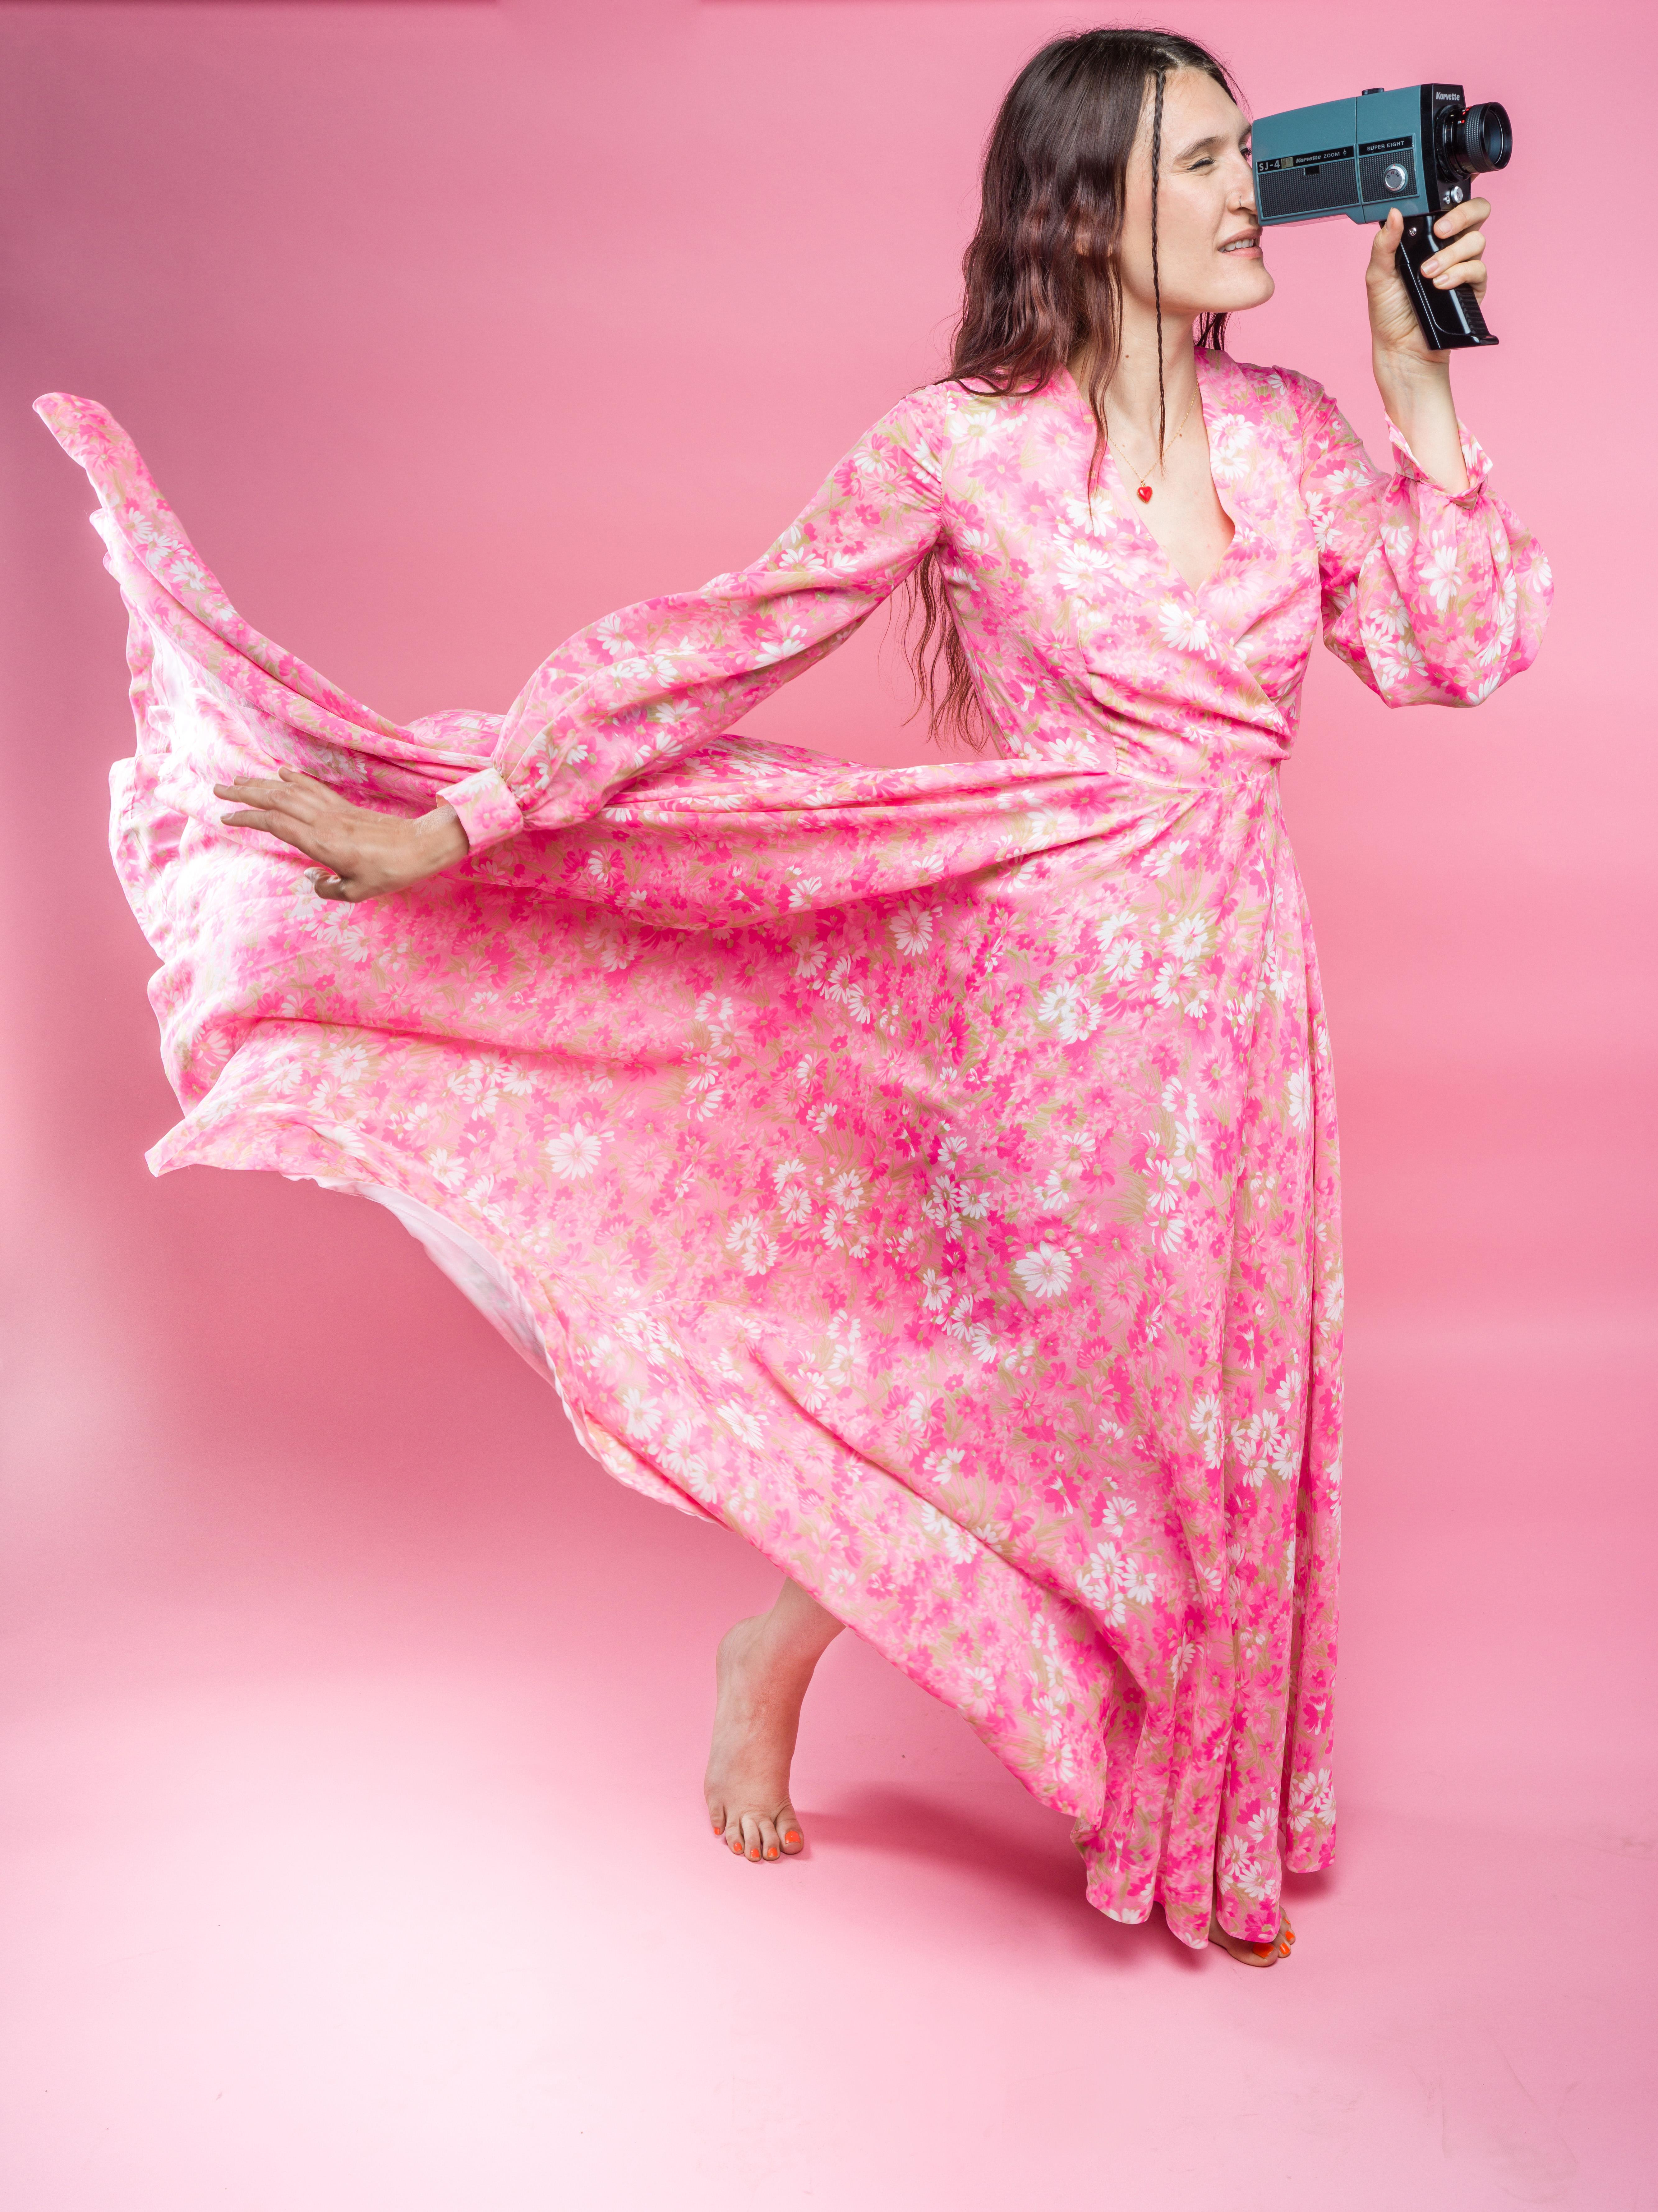 Incredible one of a kind 1970’s handmade hot pink & white floral full length, long sleeve maxi gown. This stunning piece features a very full flowing circle skirt that is gradually longer in the back, with lots of yardage to create a dramatic twirl!